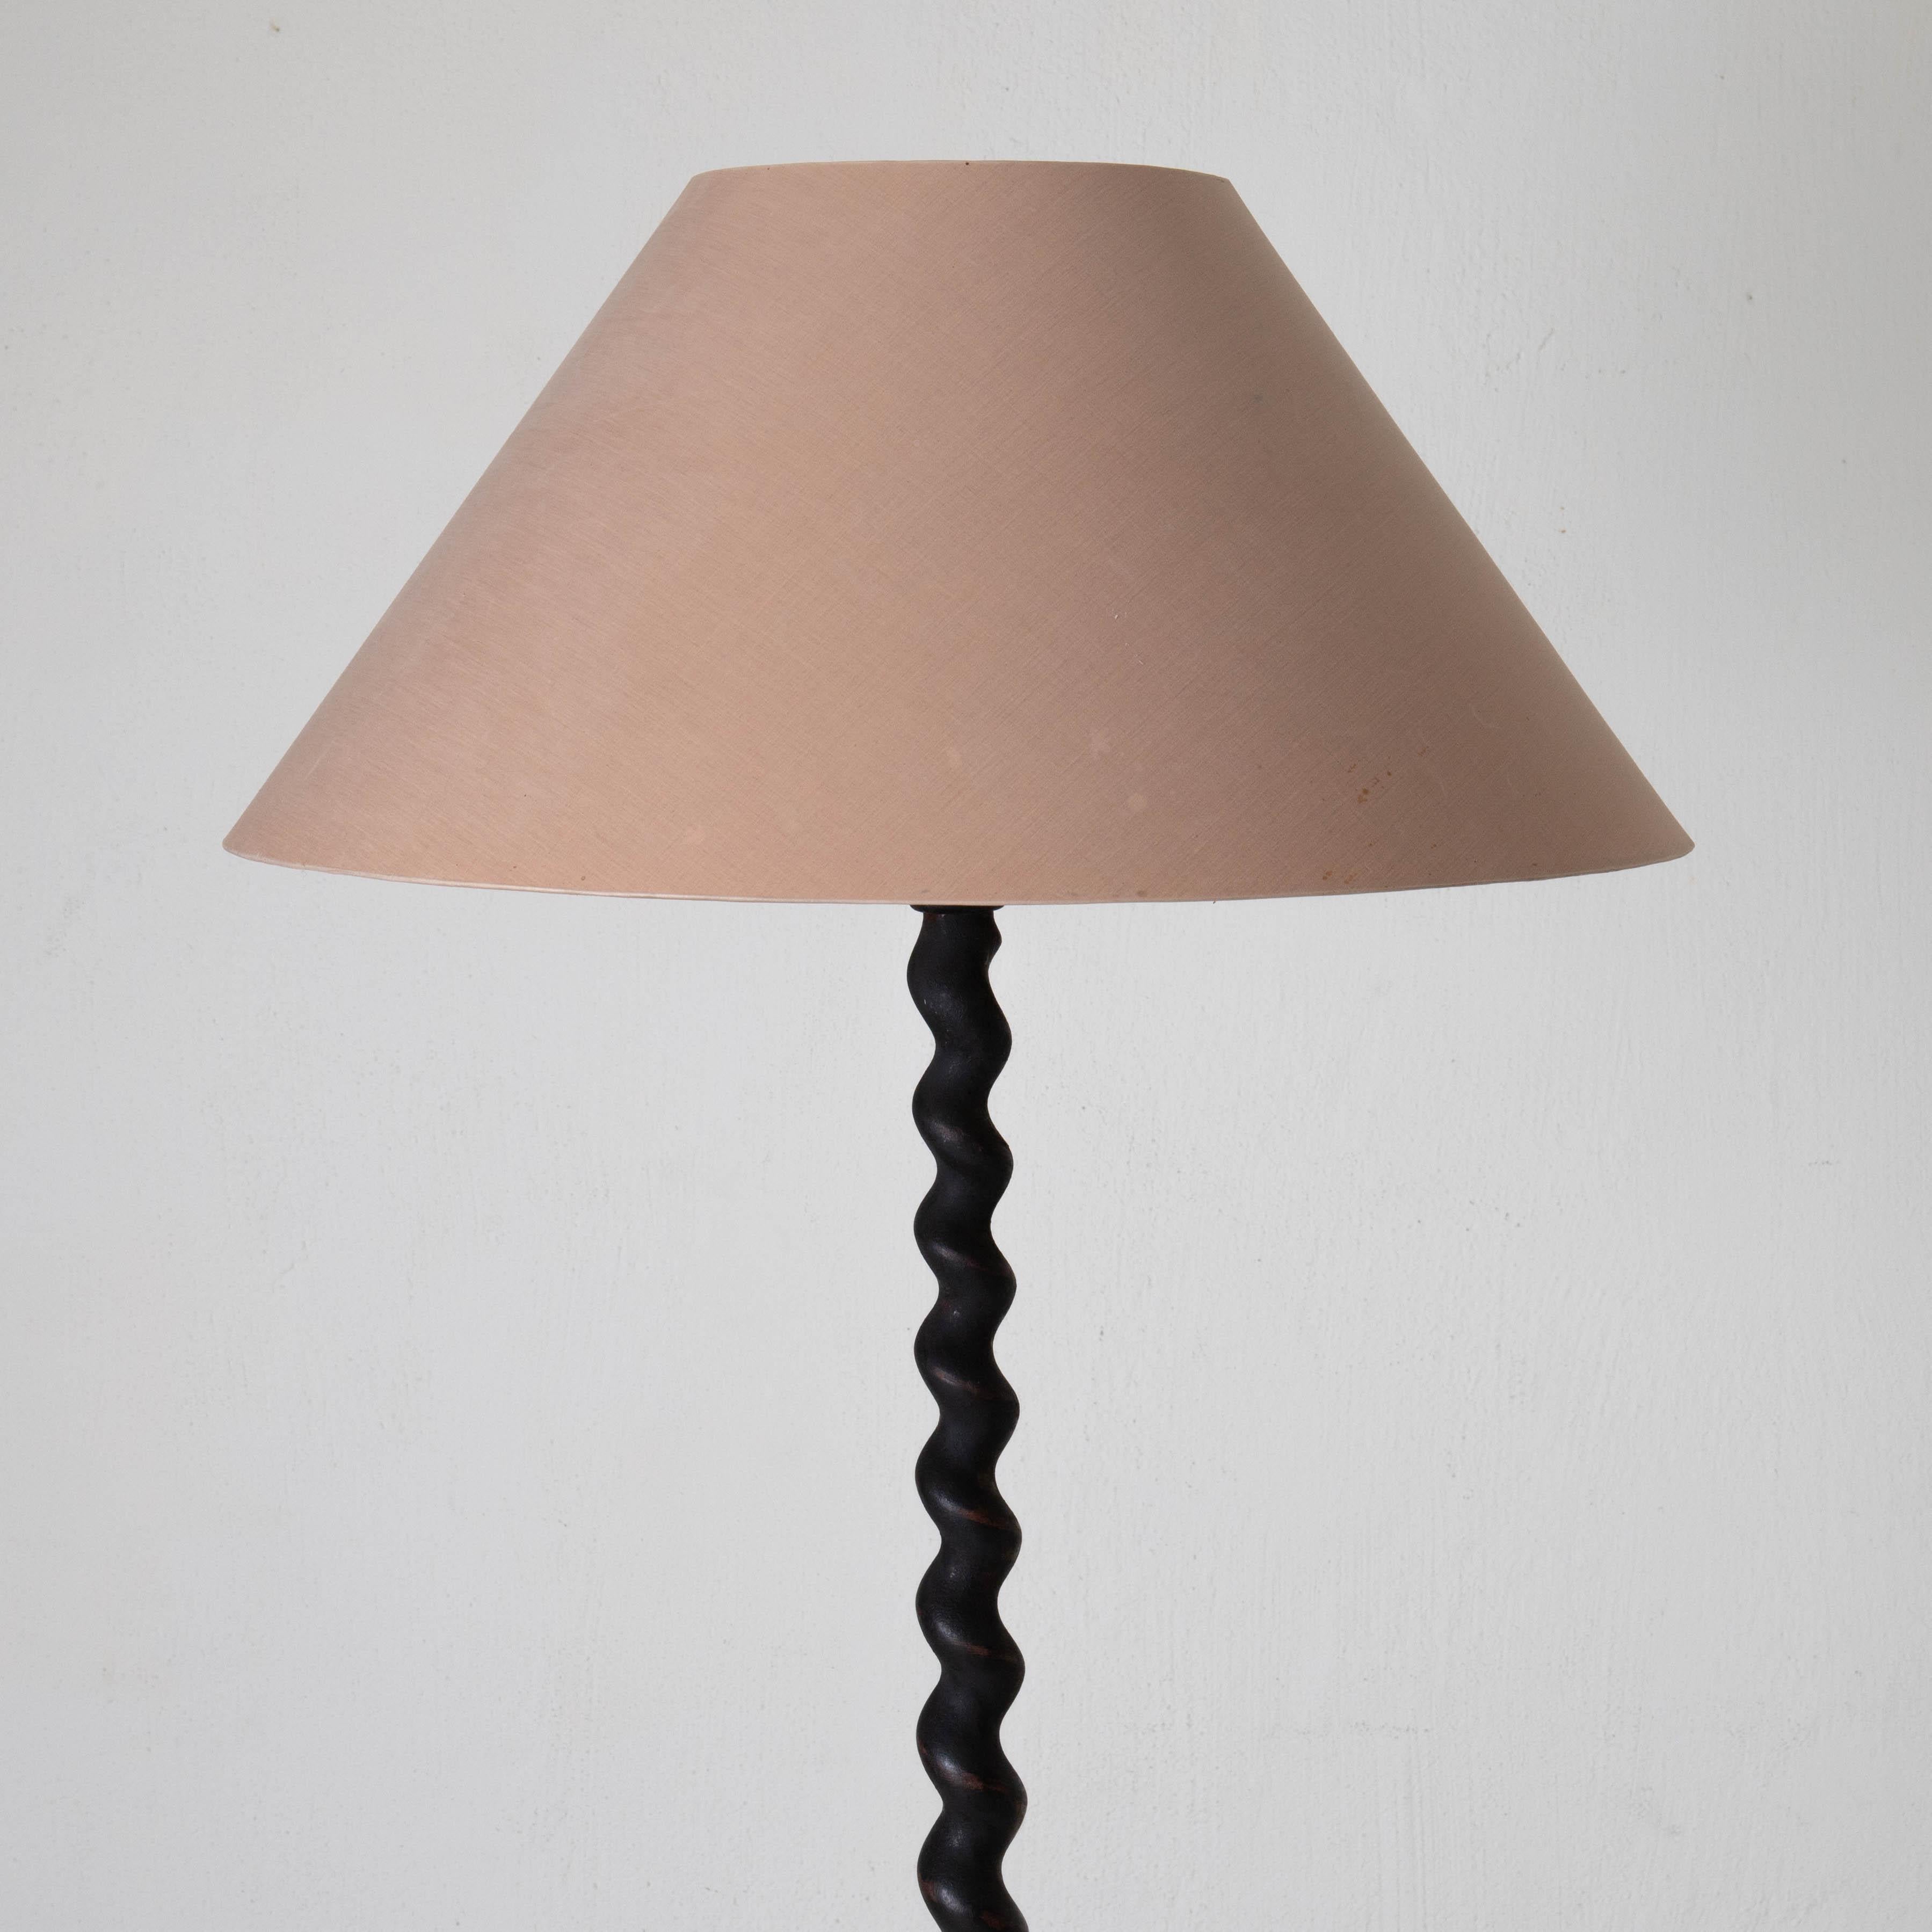 Lamp floor Swedish black spiral shape 19th century Sweden. A floor lamp in our Laserow Black. Foot in a spiral shape.